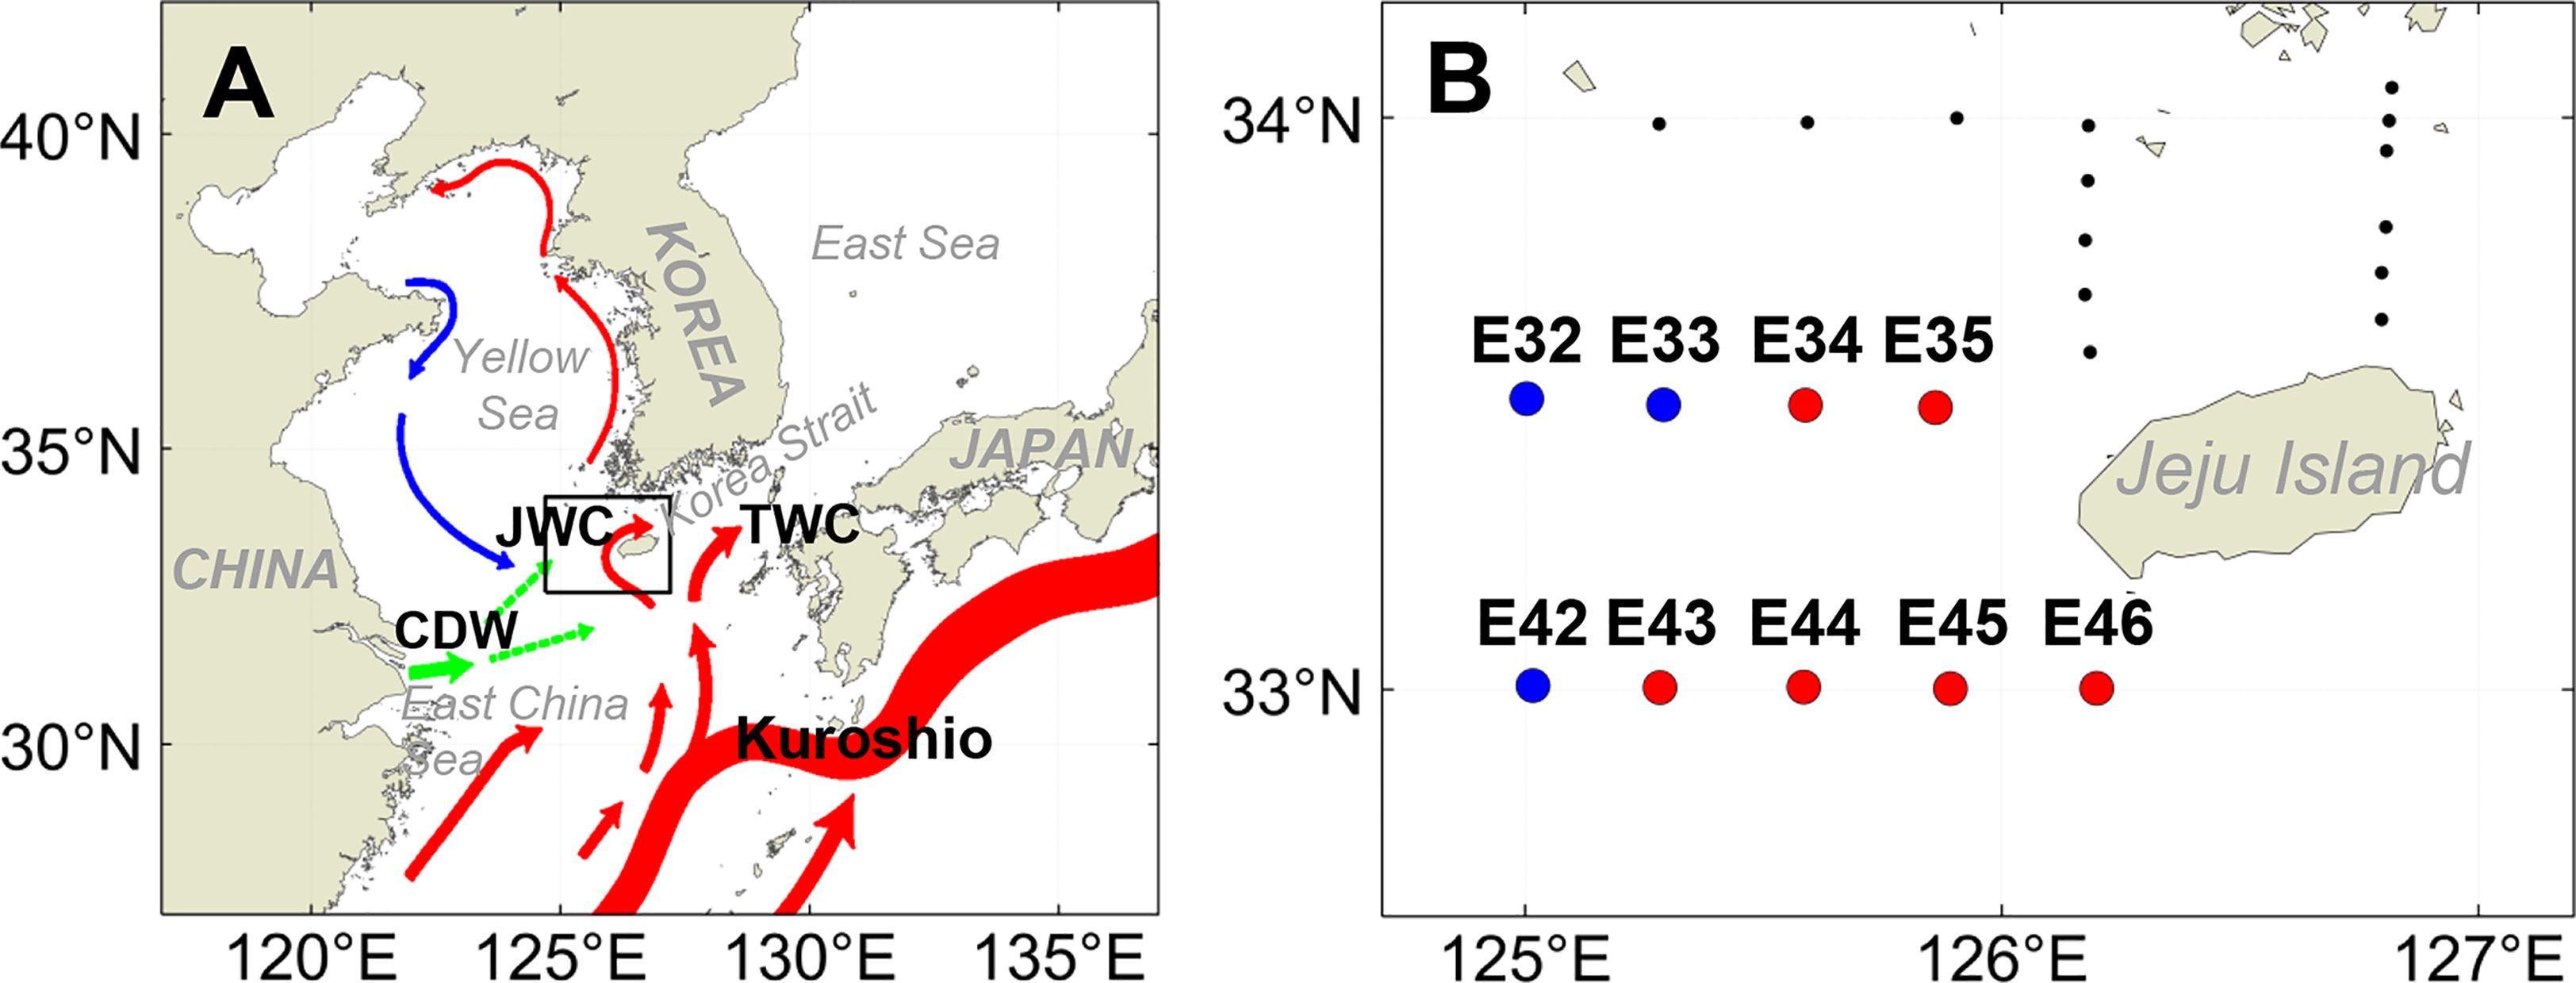 Frontiers  Diversity, Composition, and Activities of Nano- and  Pico-Eukaryotes in the Northern South China Sea With Influences of Kuroshio  Intrusion